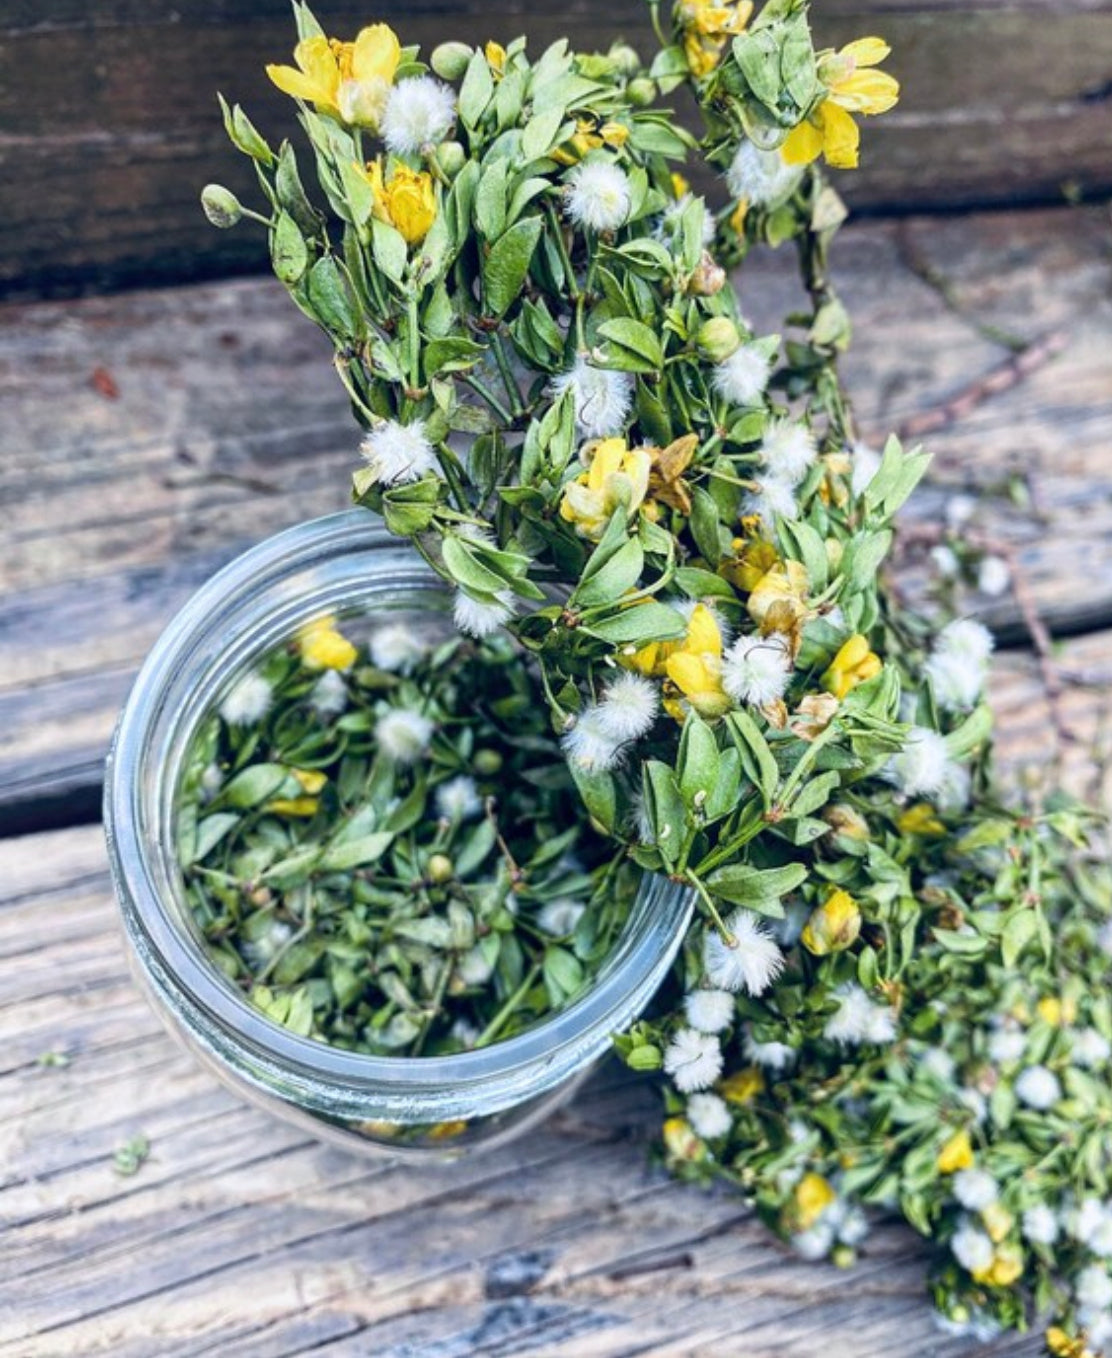 HANDPICKED CREOSOTE LEAVES  INFUSED IN A JAR WITH ORGANIC GRAPESEED OIL . CREOSOTE LEAVES HAVE SMALL FLOWERS ON STEMS